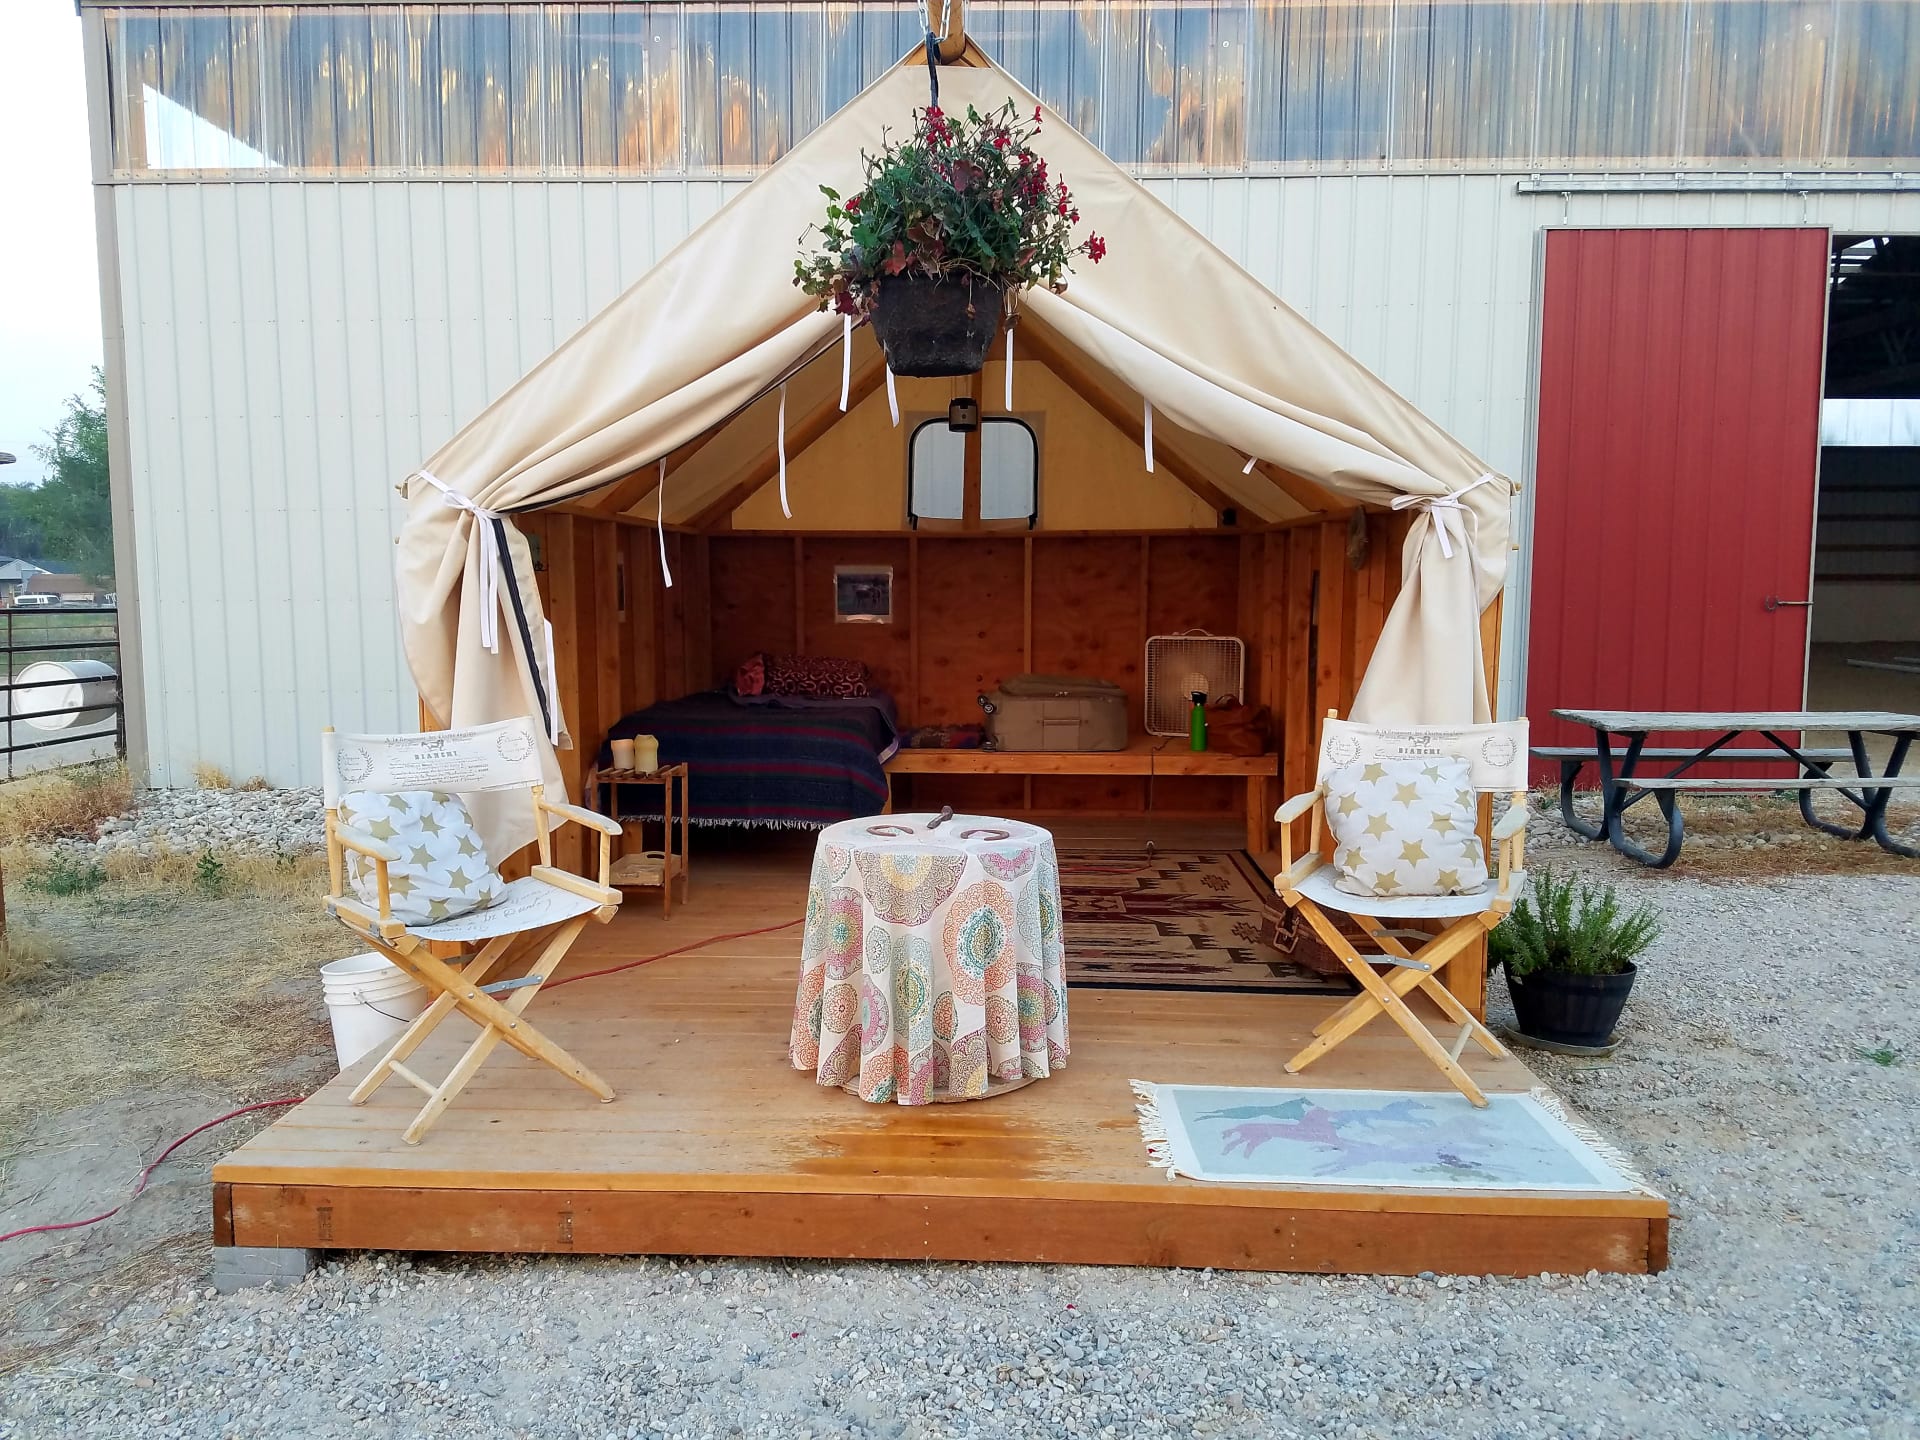 Our glamorous camping tent is cowgirl chic and fun! A custom-made wall tent is placed on a wooden platform with real wooden walls. Two single, comfy beds have linens and warm blankets. The whole tent is furnished with rustic ranch ambiance.